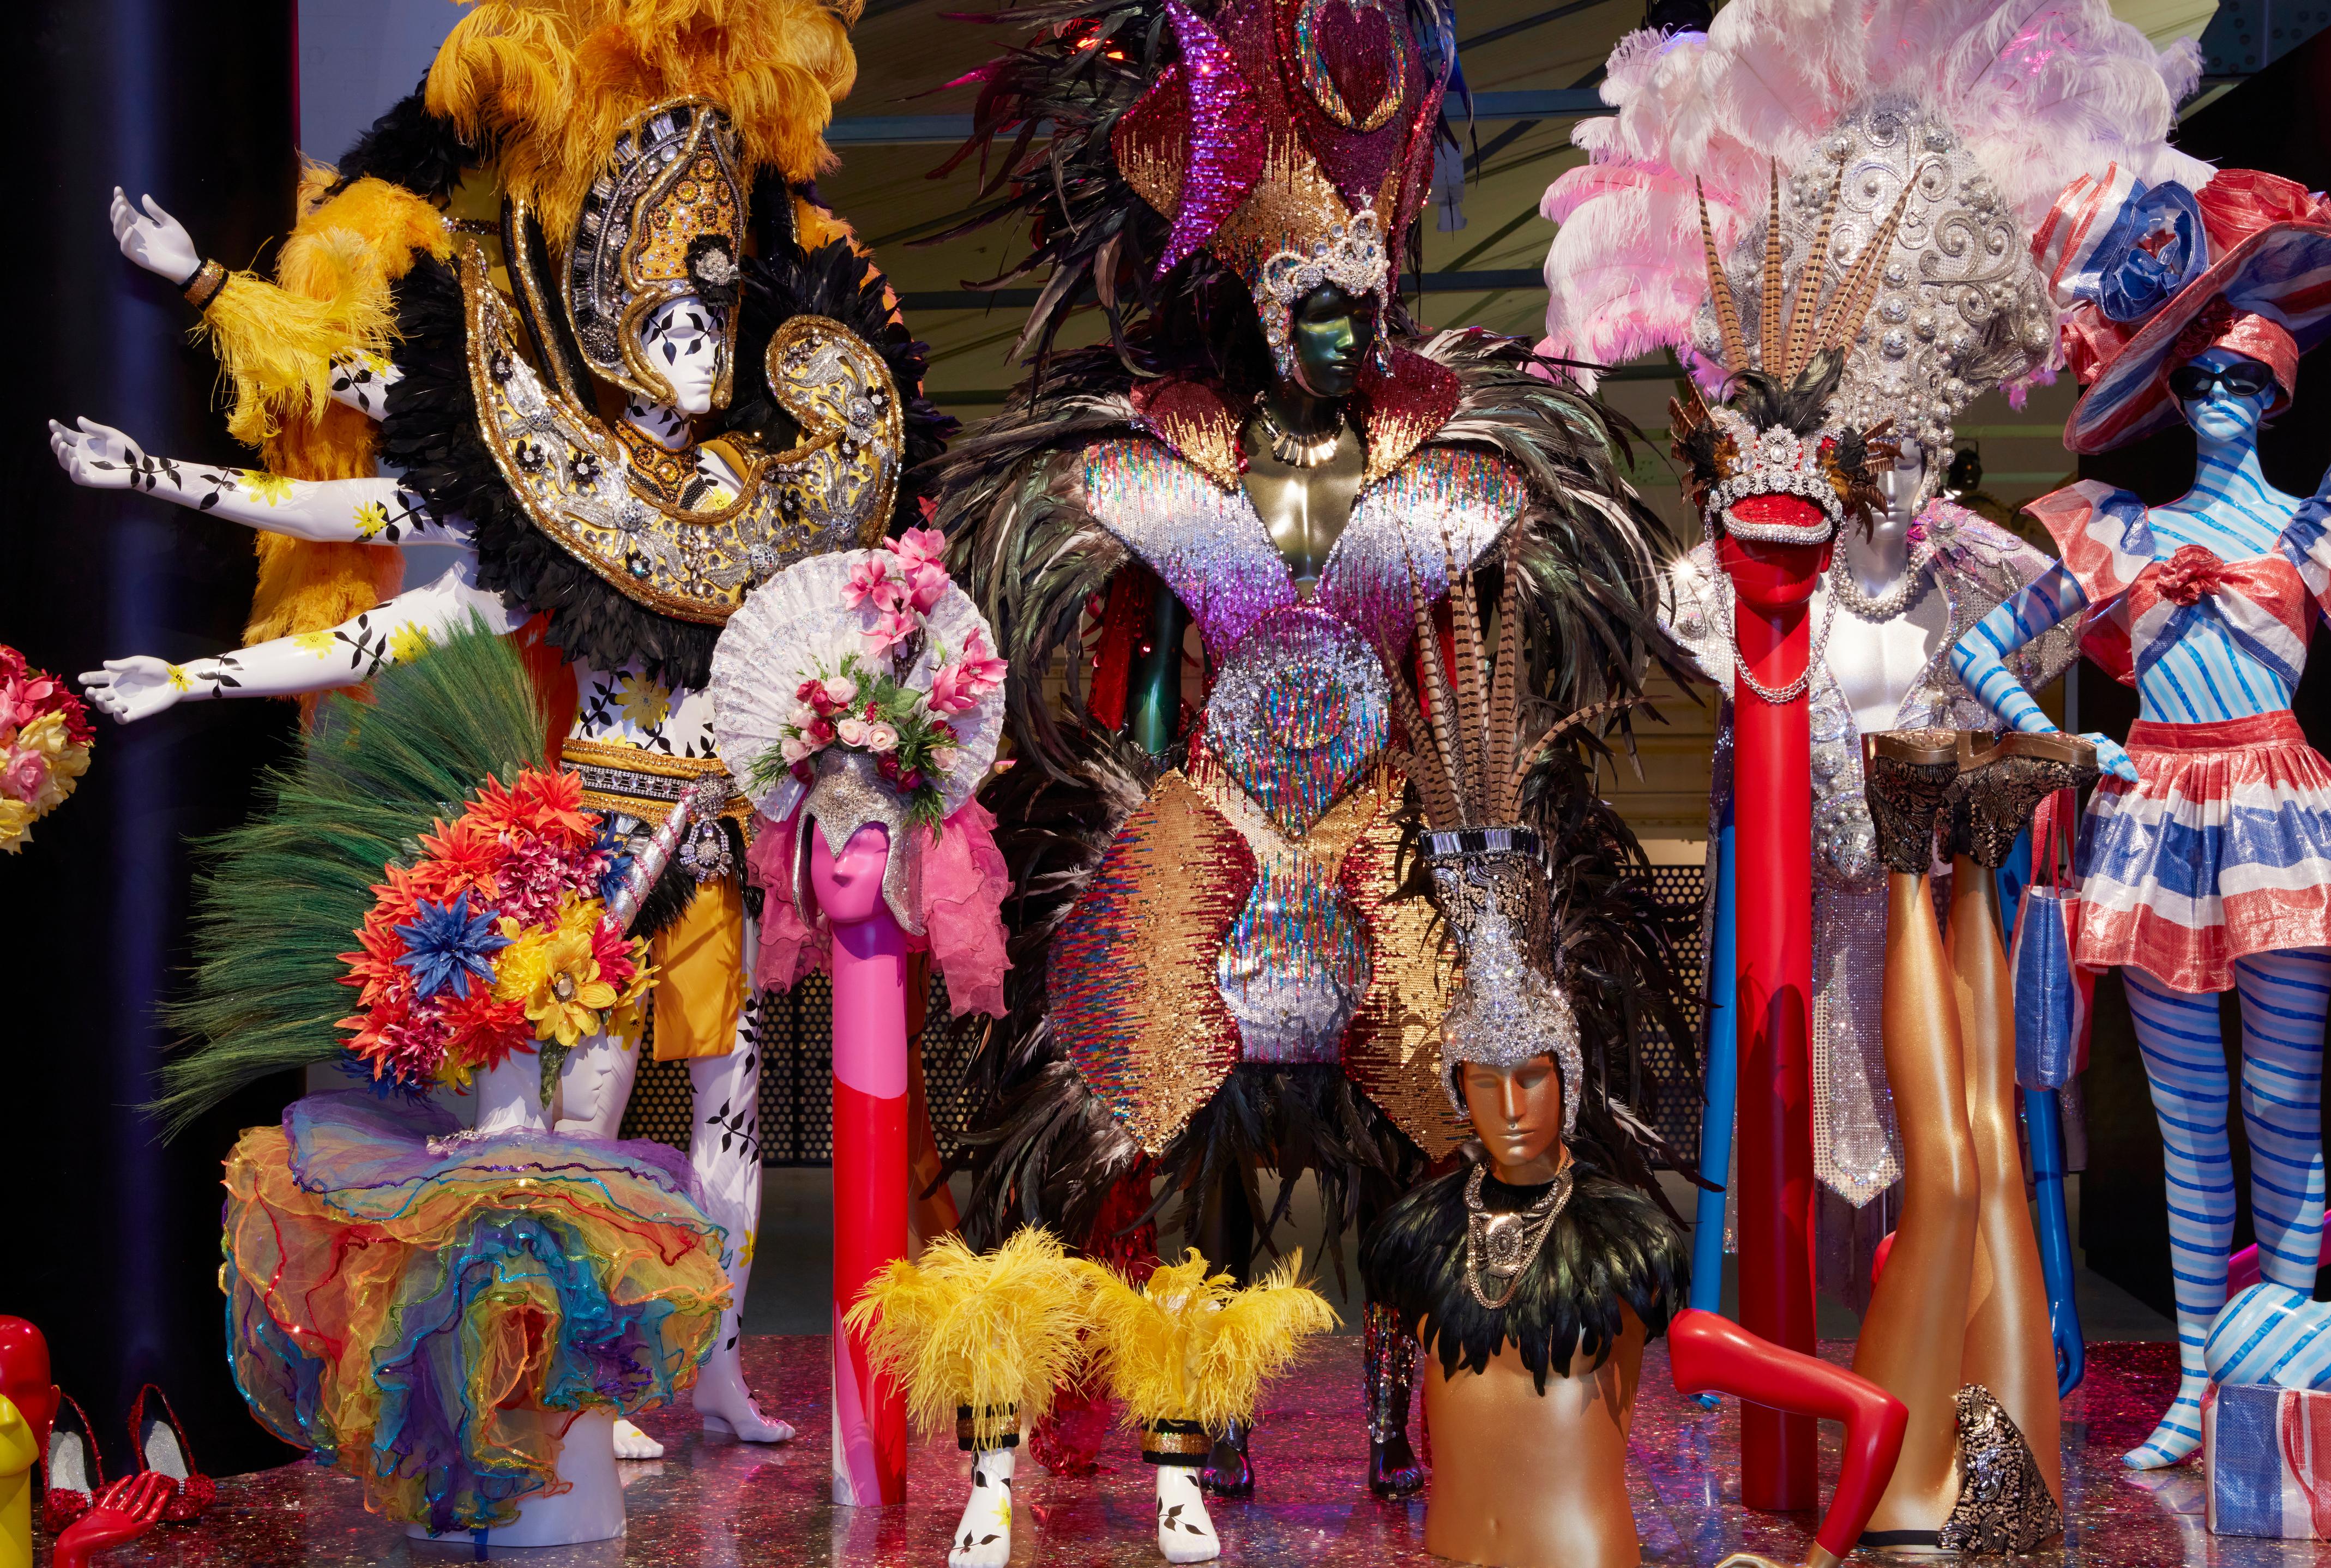 A fabulous display of costumes featuring a variety of sparkles, colours, feathers and textures.